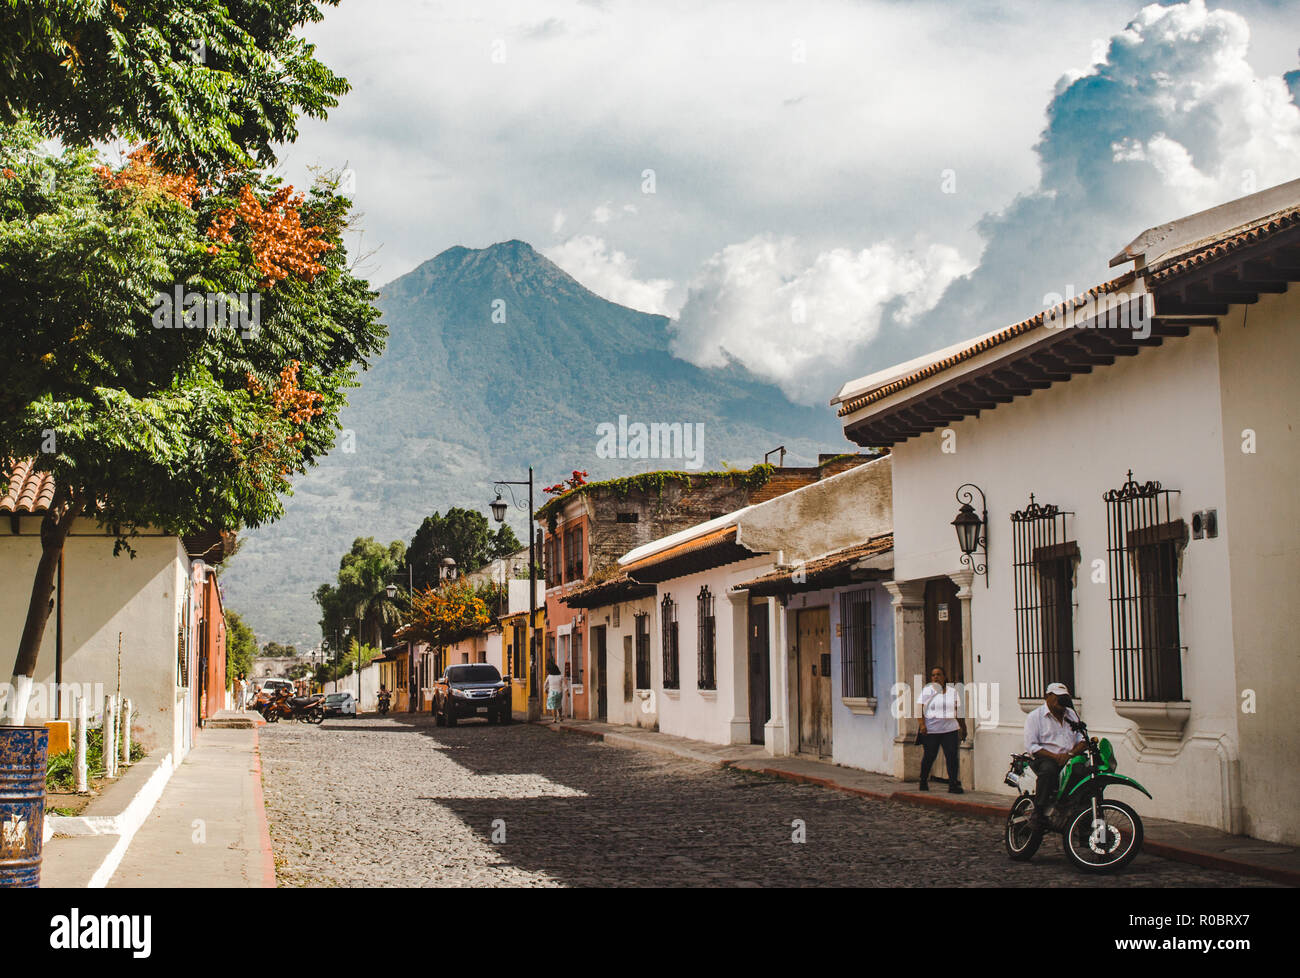 Typical cobbled street in Antigua Guatemala during a sunny day - Volcan Agua volcano looming over colonial style houses Stock Photo